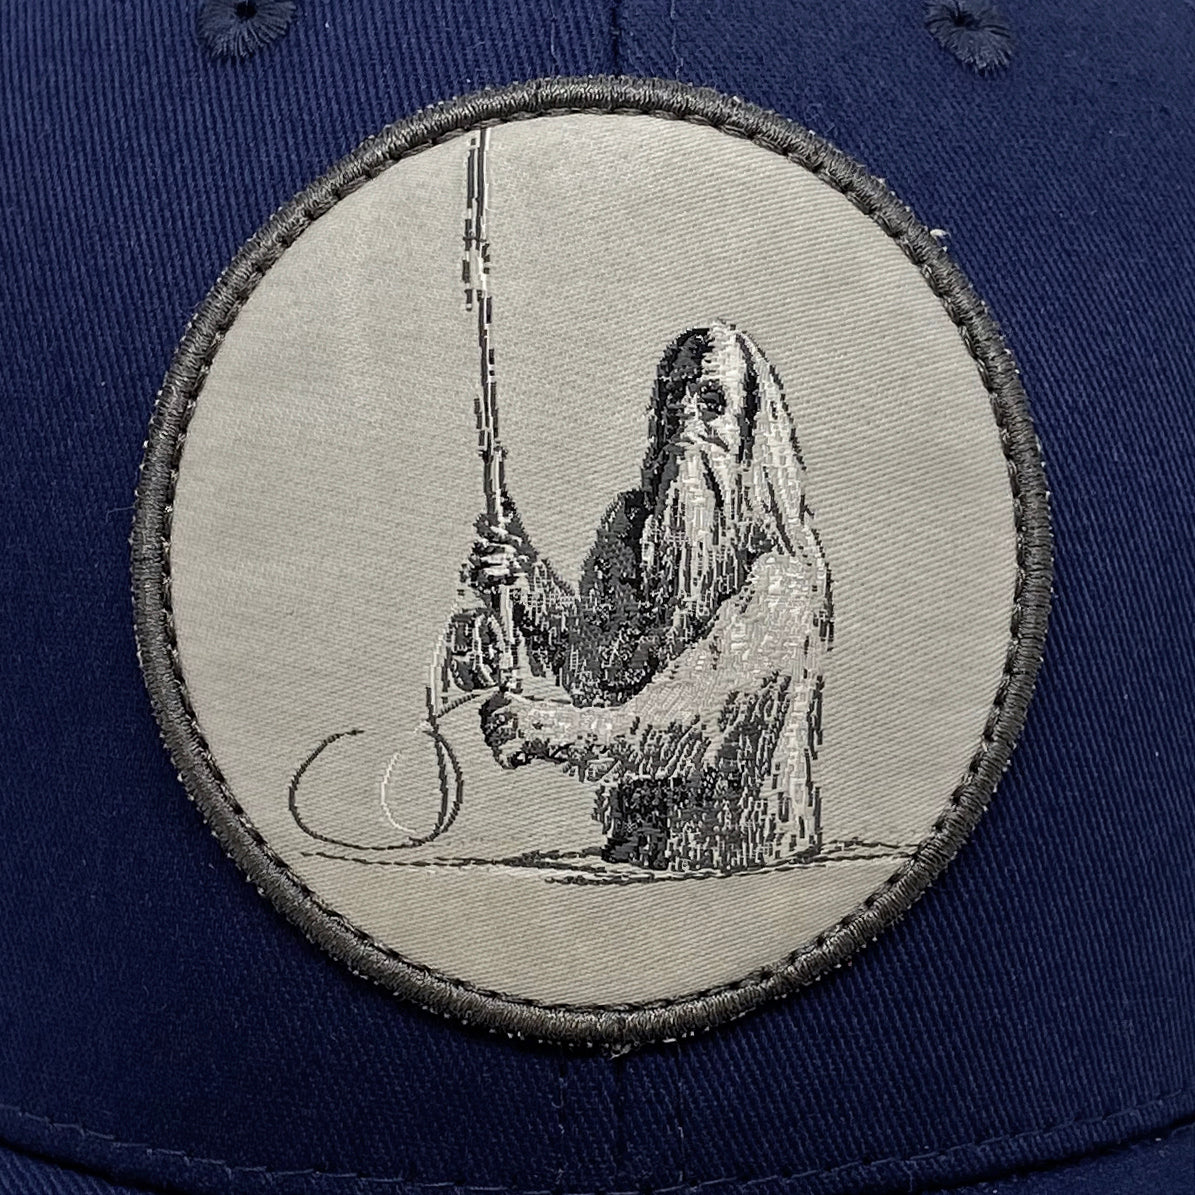 A close up of the patch that features a sasquatch casting a spey rod